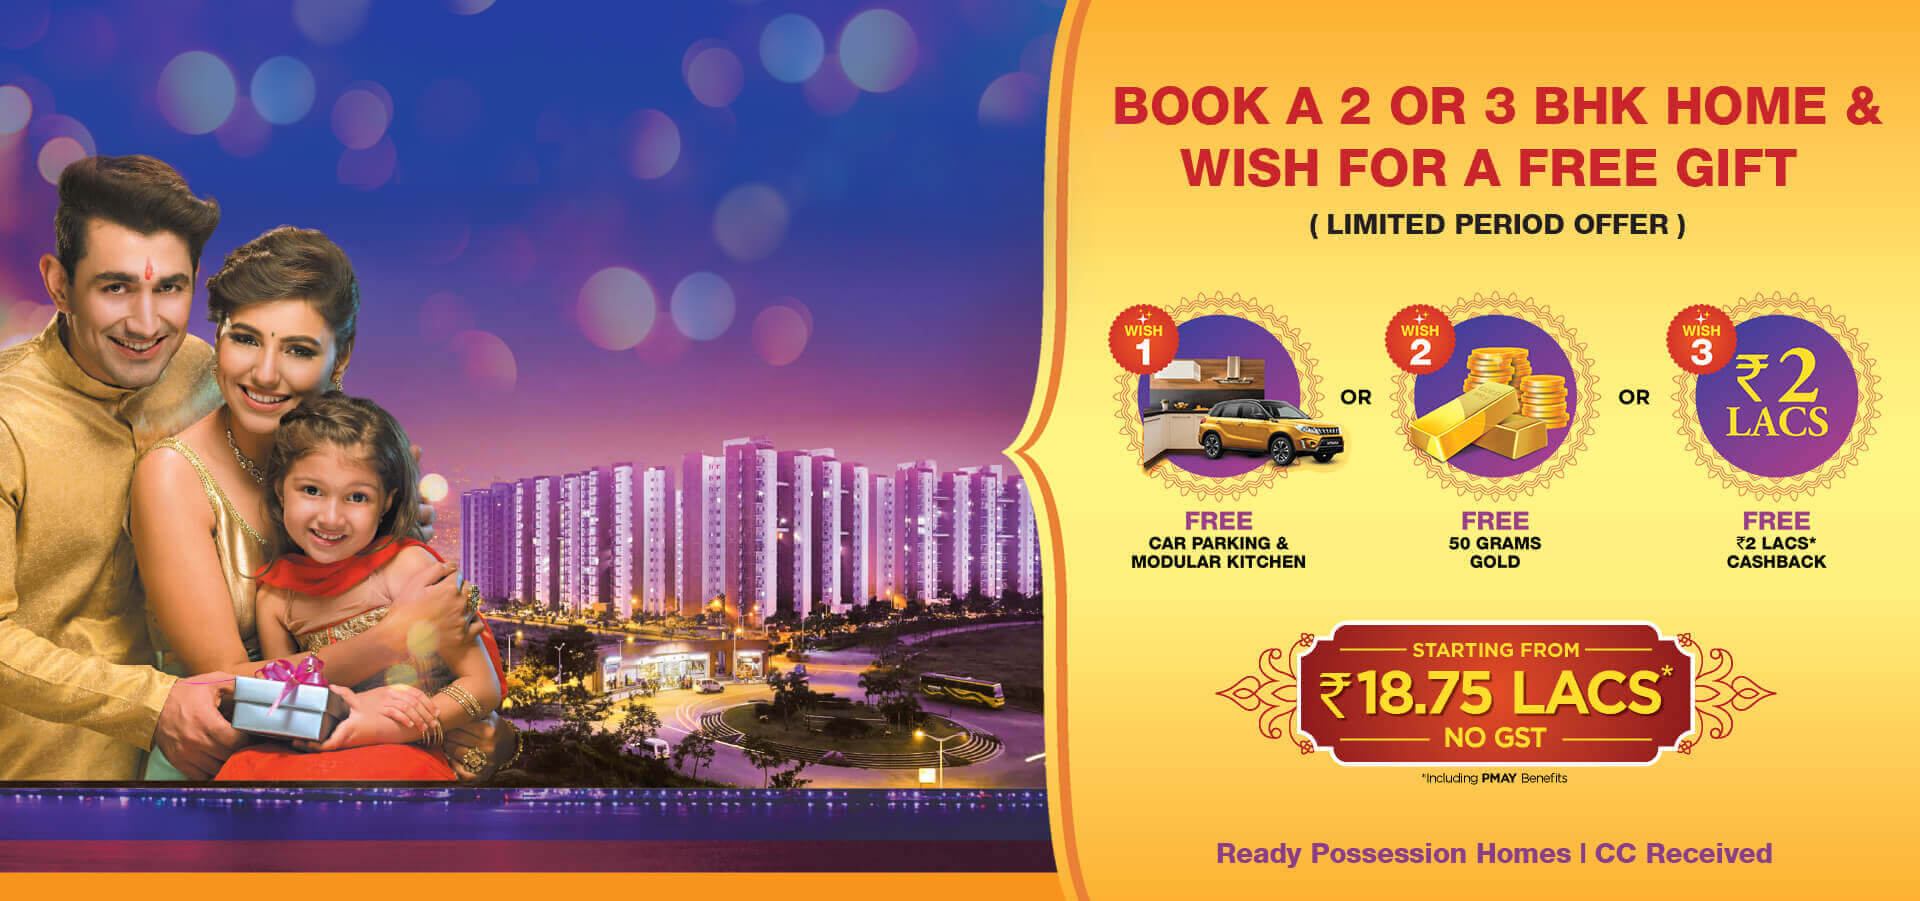 Iq City Booking Offer